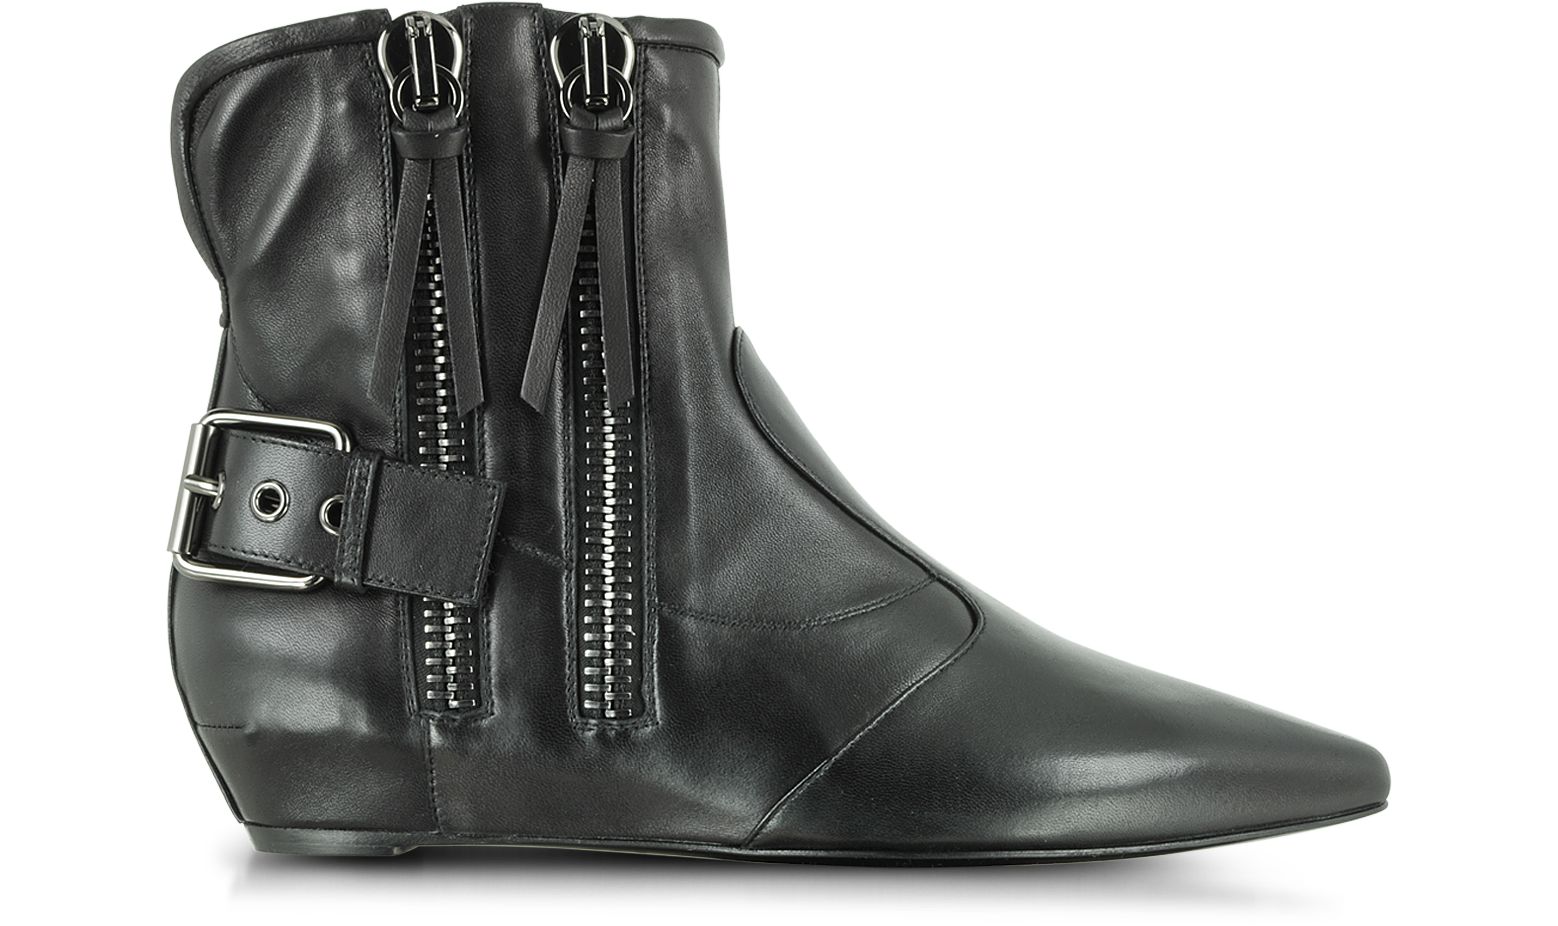 Giuseppe Zanotti Black Leather Wedge Boot w/Zips and Buckle 36 IT/EU at ...